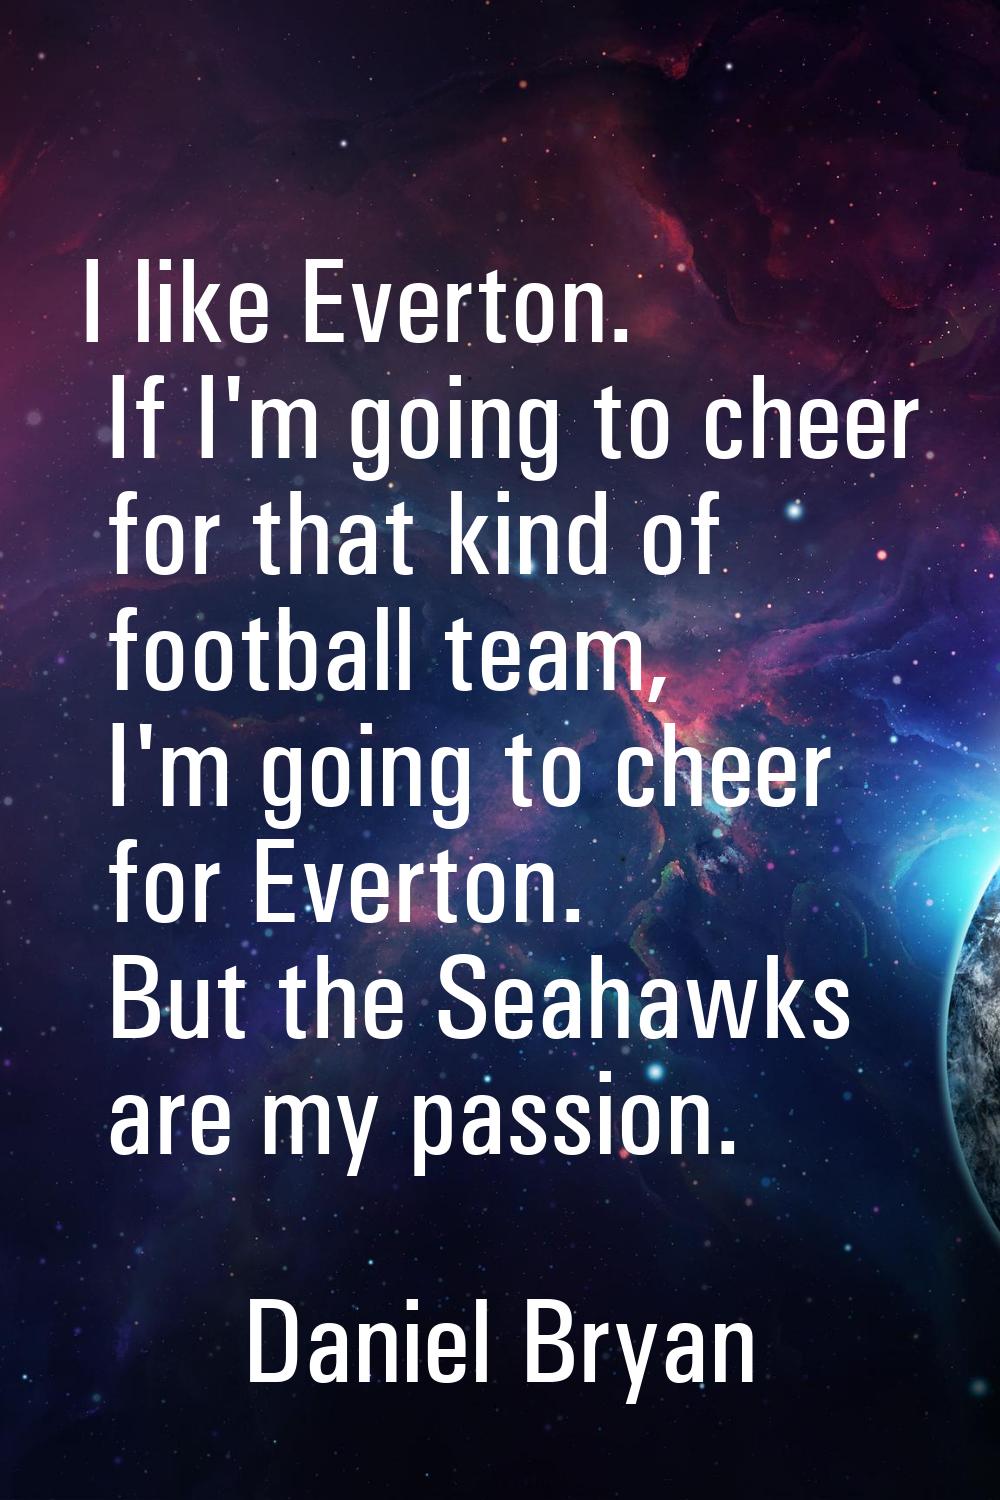 I like Everton. If I'm going to cheer for that kind of football team, I'm going to cheer for Everto